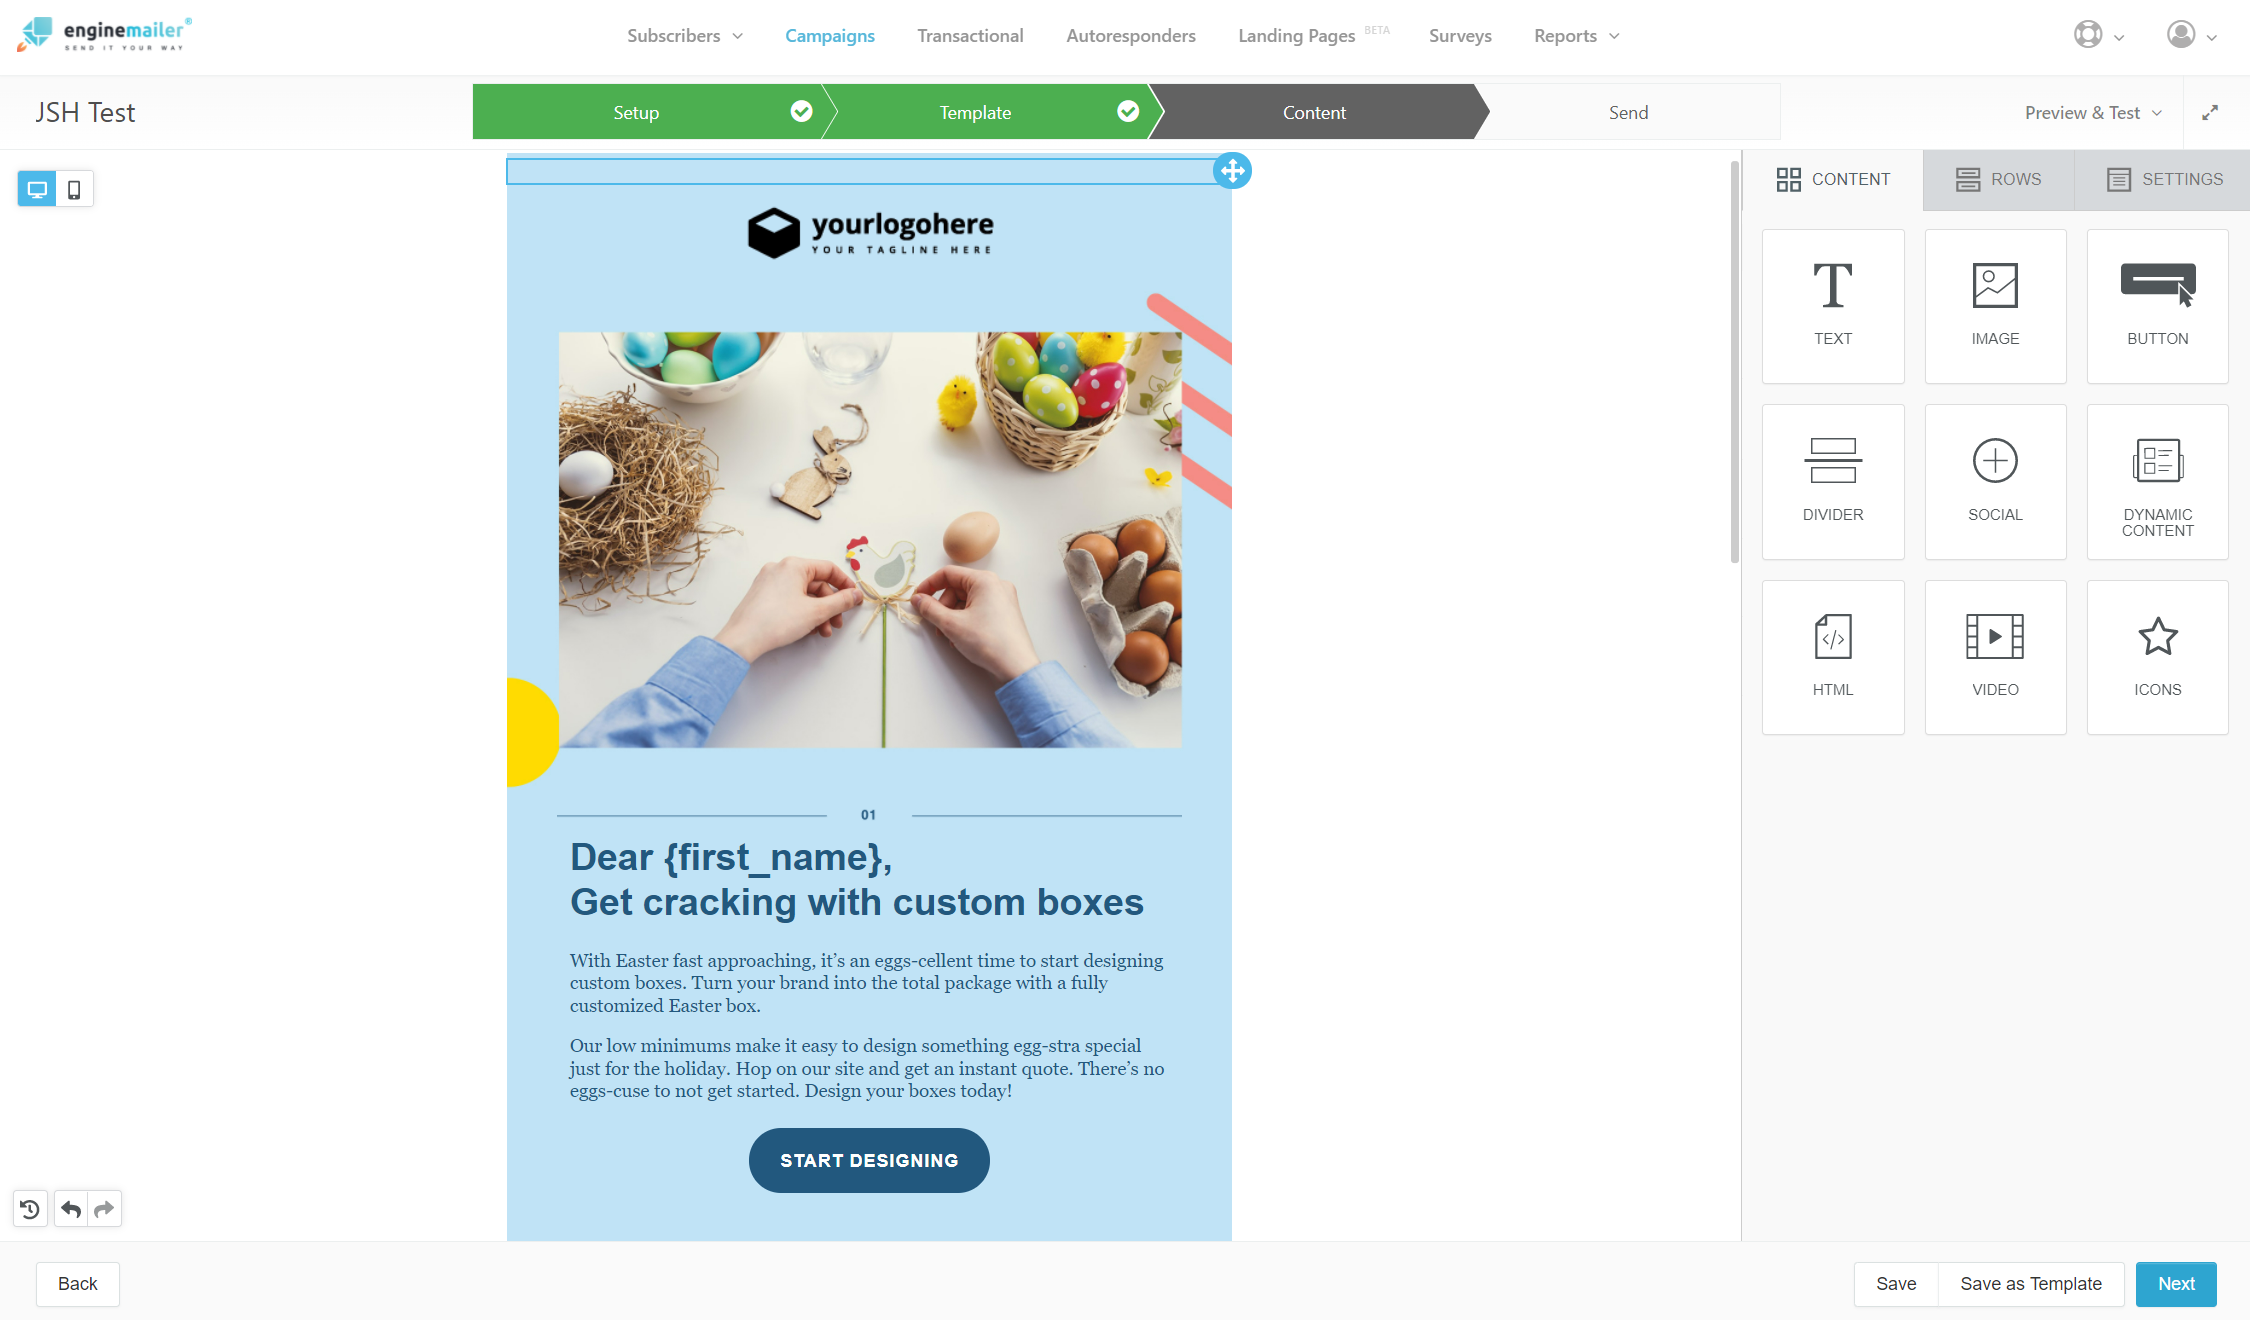 Easily create newsletters using Enginemailer's responsive drag-and-drop editor